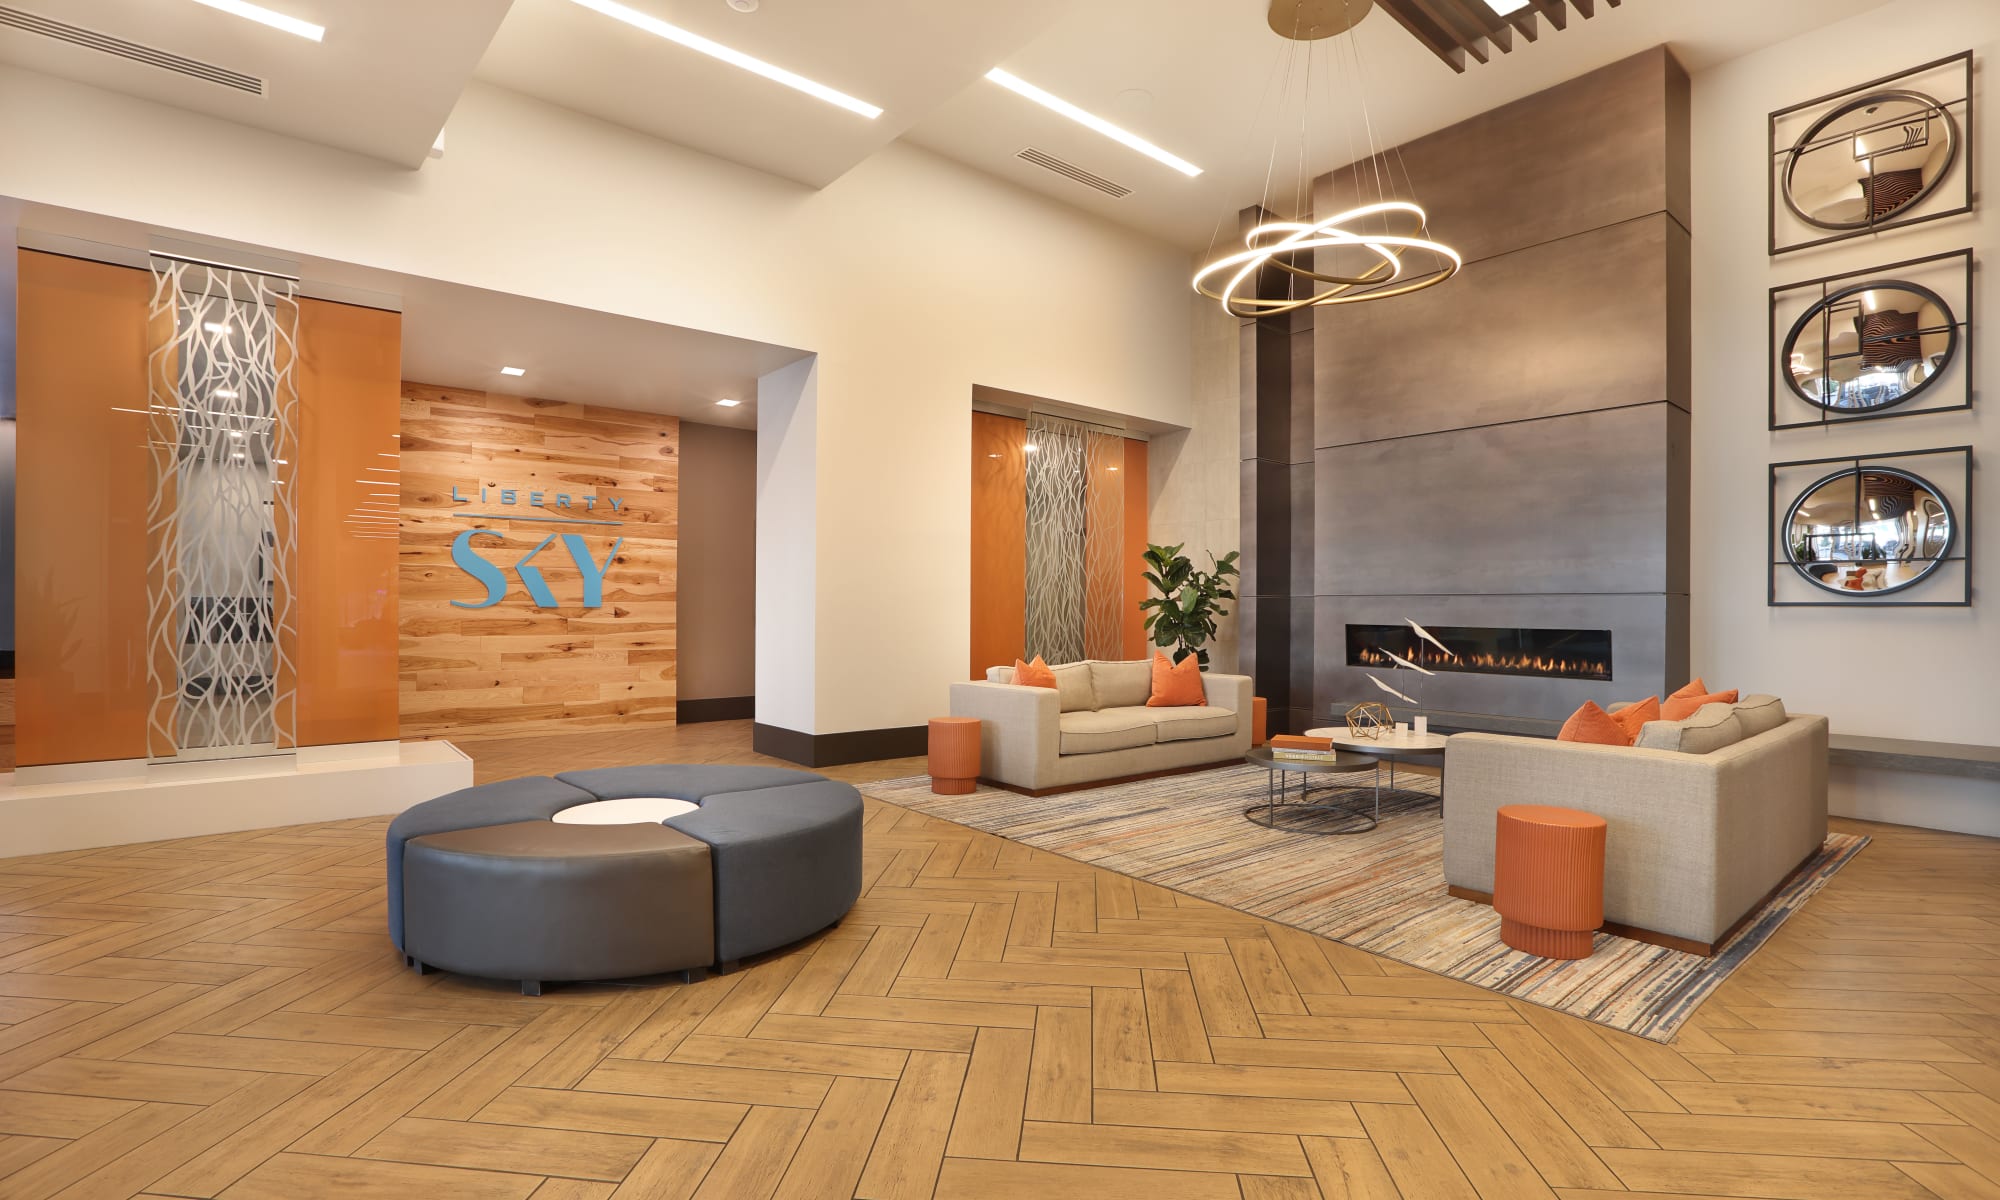 Lobby with fireplace, chandelier and sofas at Luxury high-rise community of Liberty SKY in Salt Lake City, Utah 